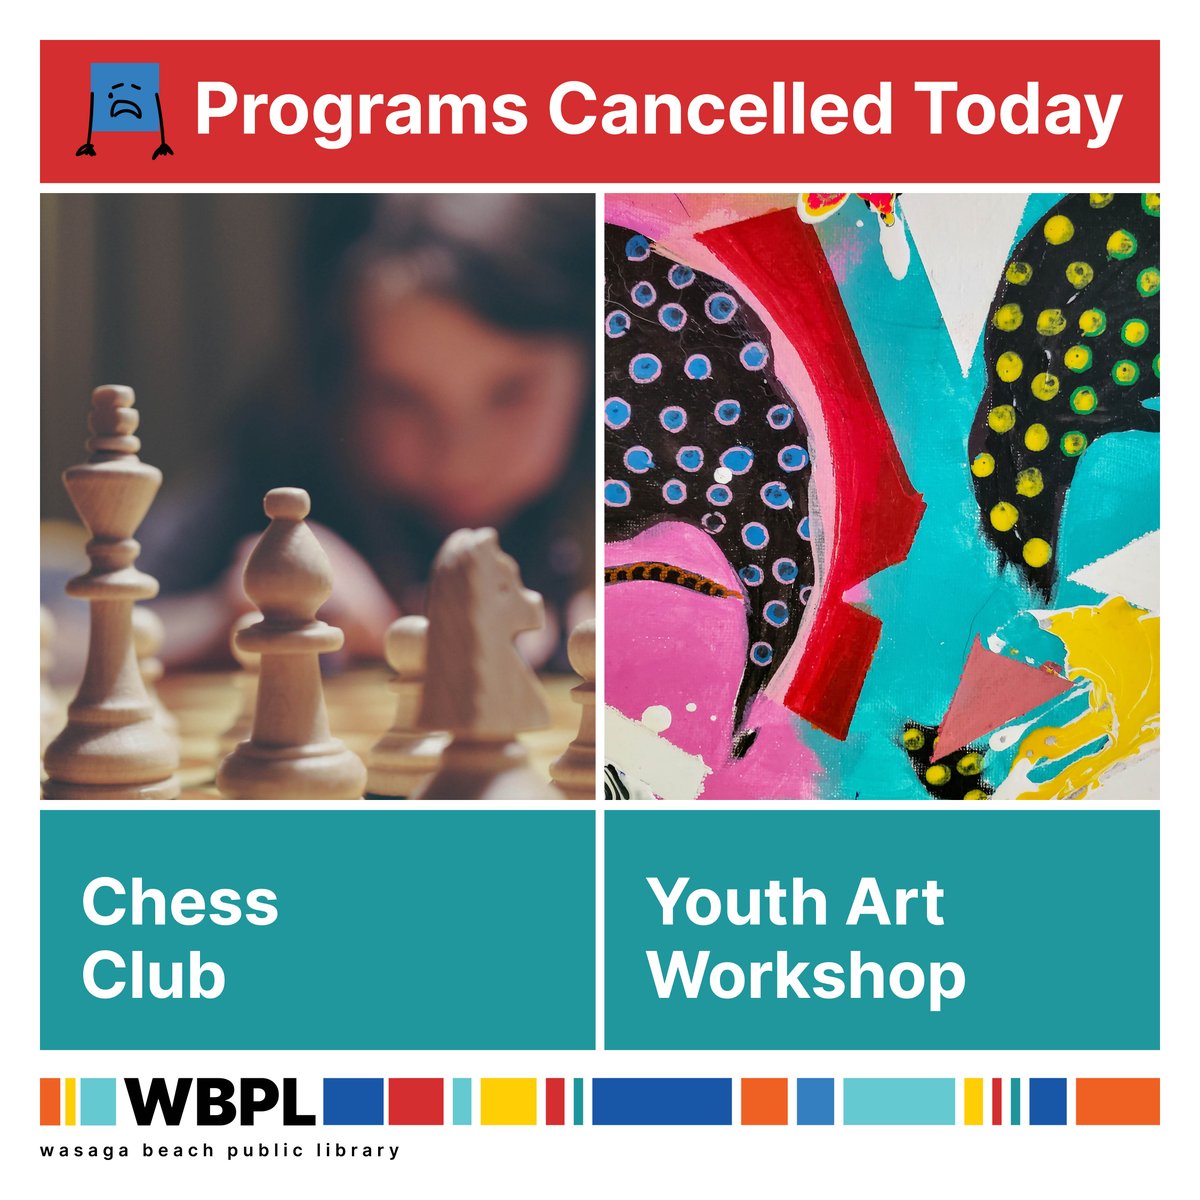 🚨 Important Update: All programs at Wasaga Beach Public Library have been cancelled today, including Chess Club and the Youth Art Workshop. We apologize for any inconvenience. #Cancellation #WasagaBeac #FindItHere